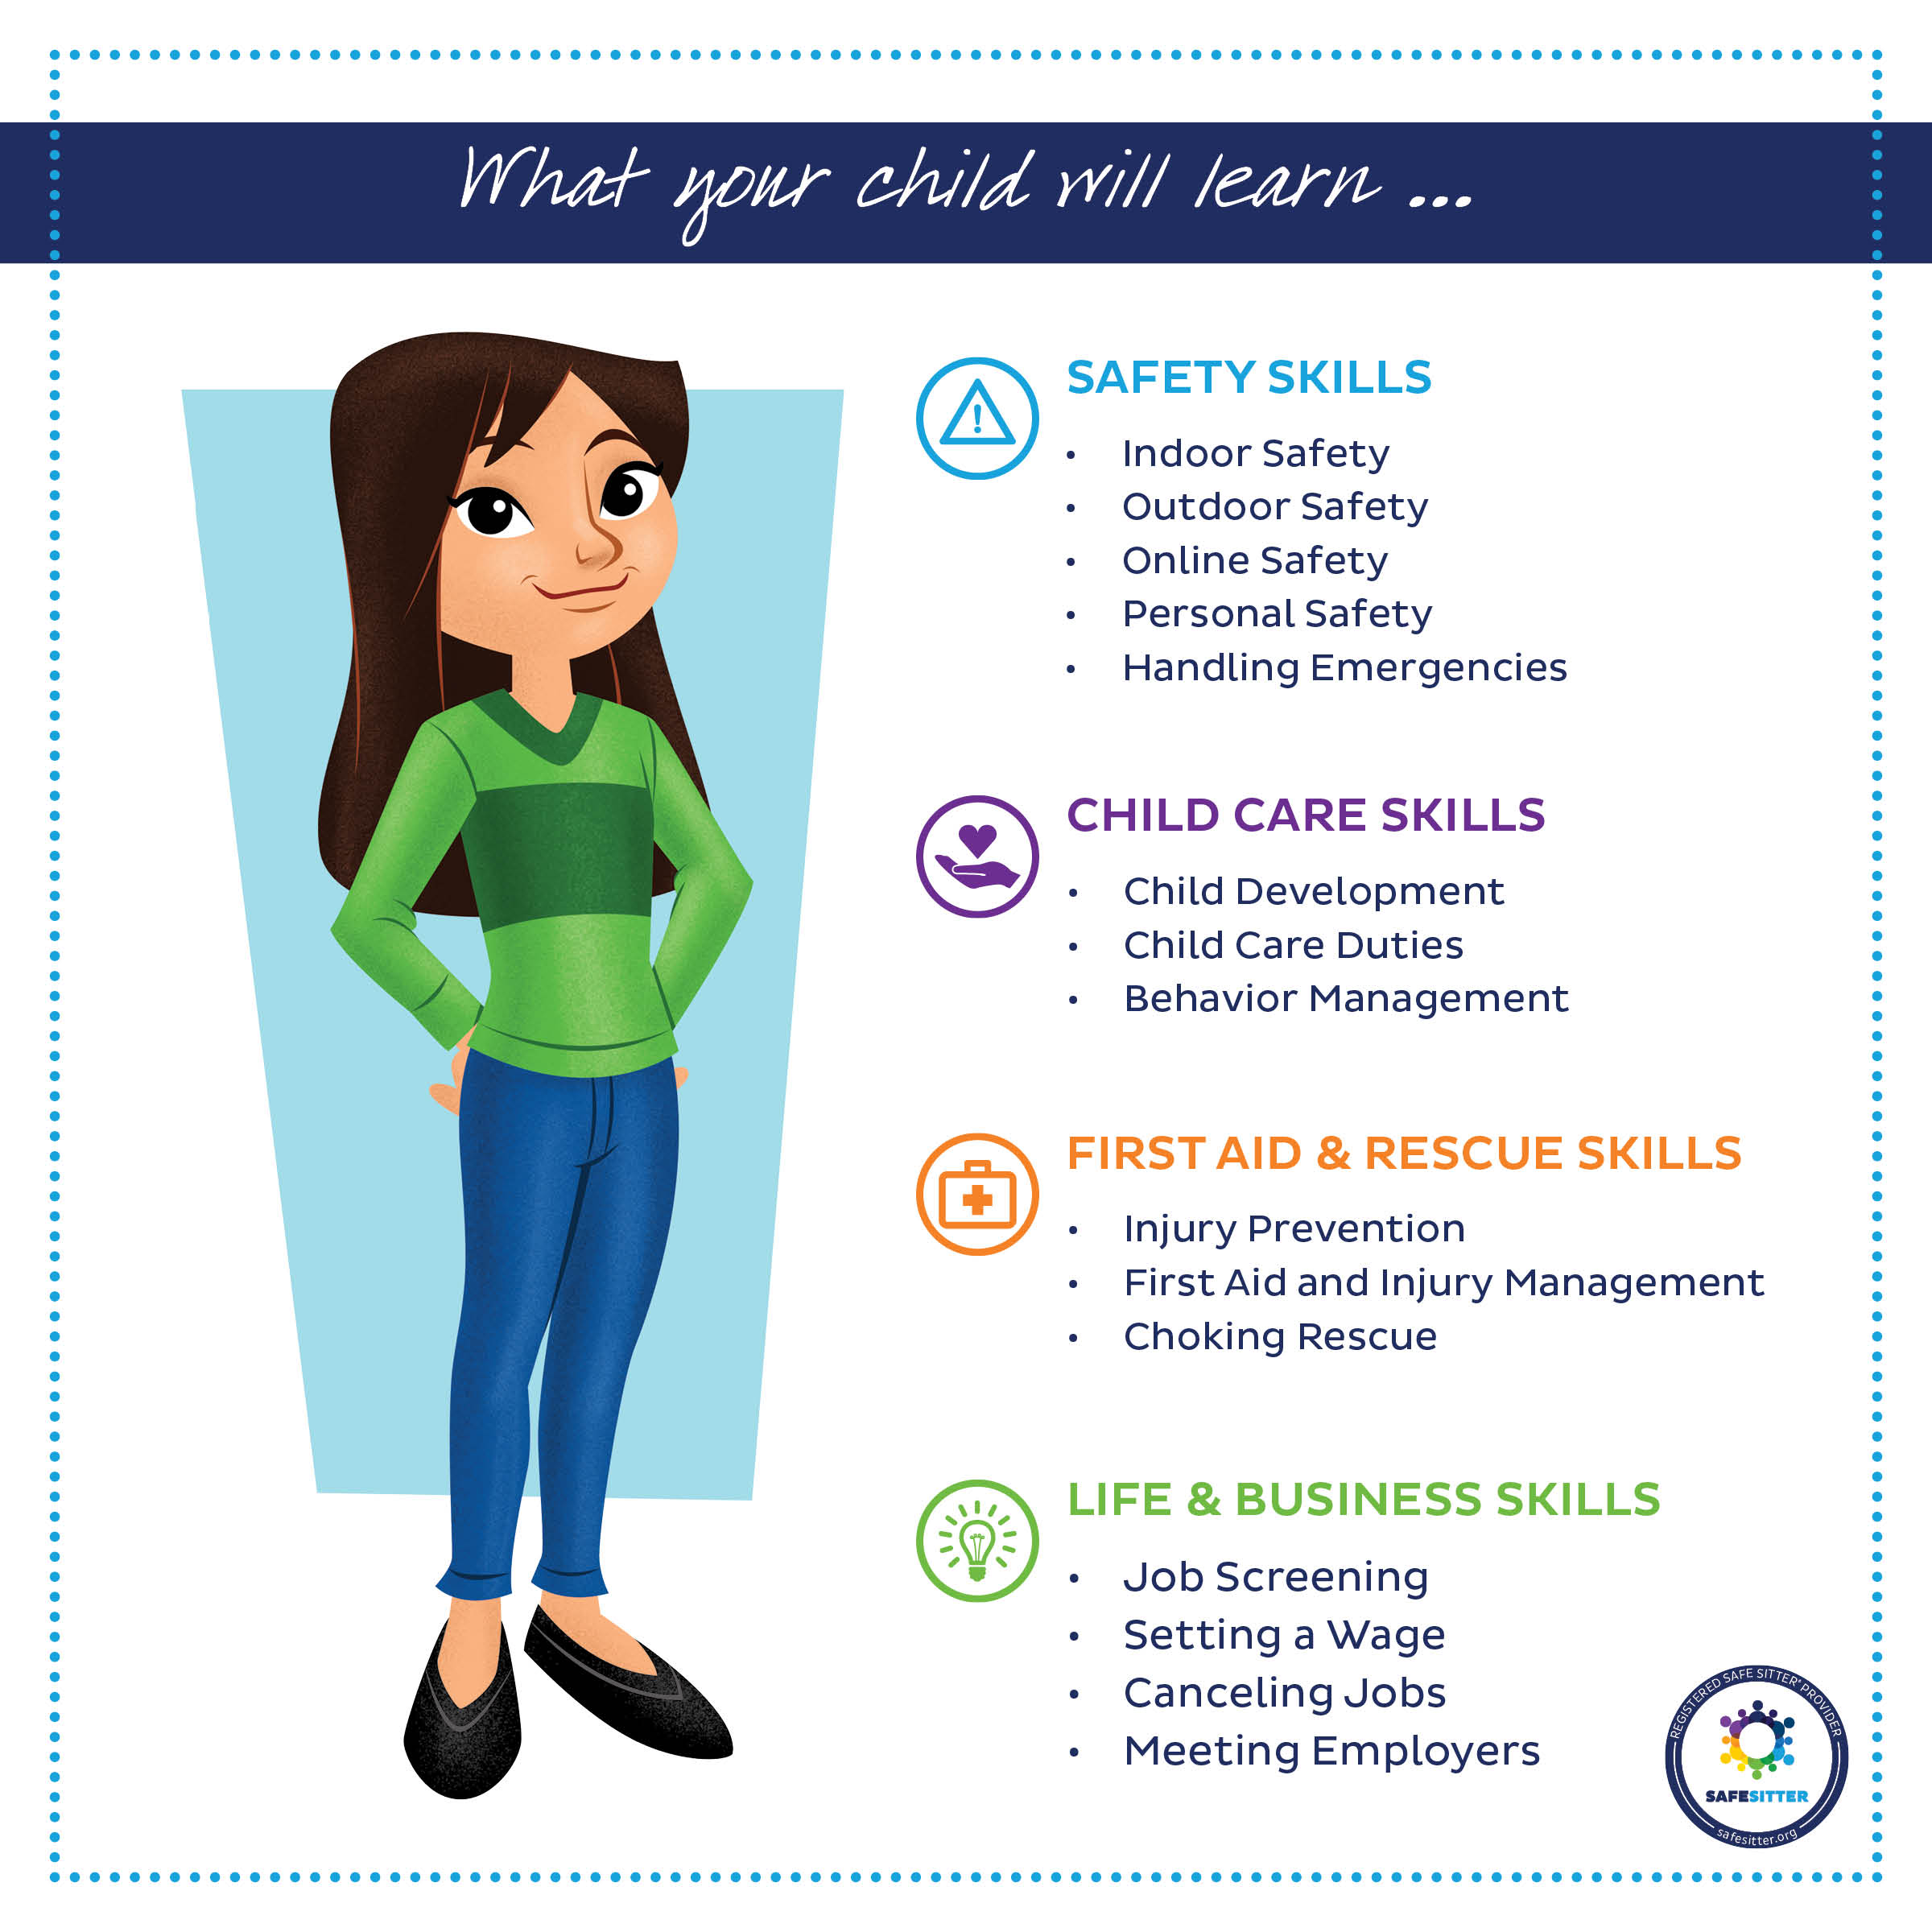 Safe Sitter skills you'll learn